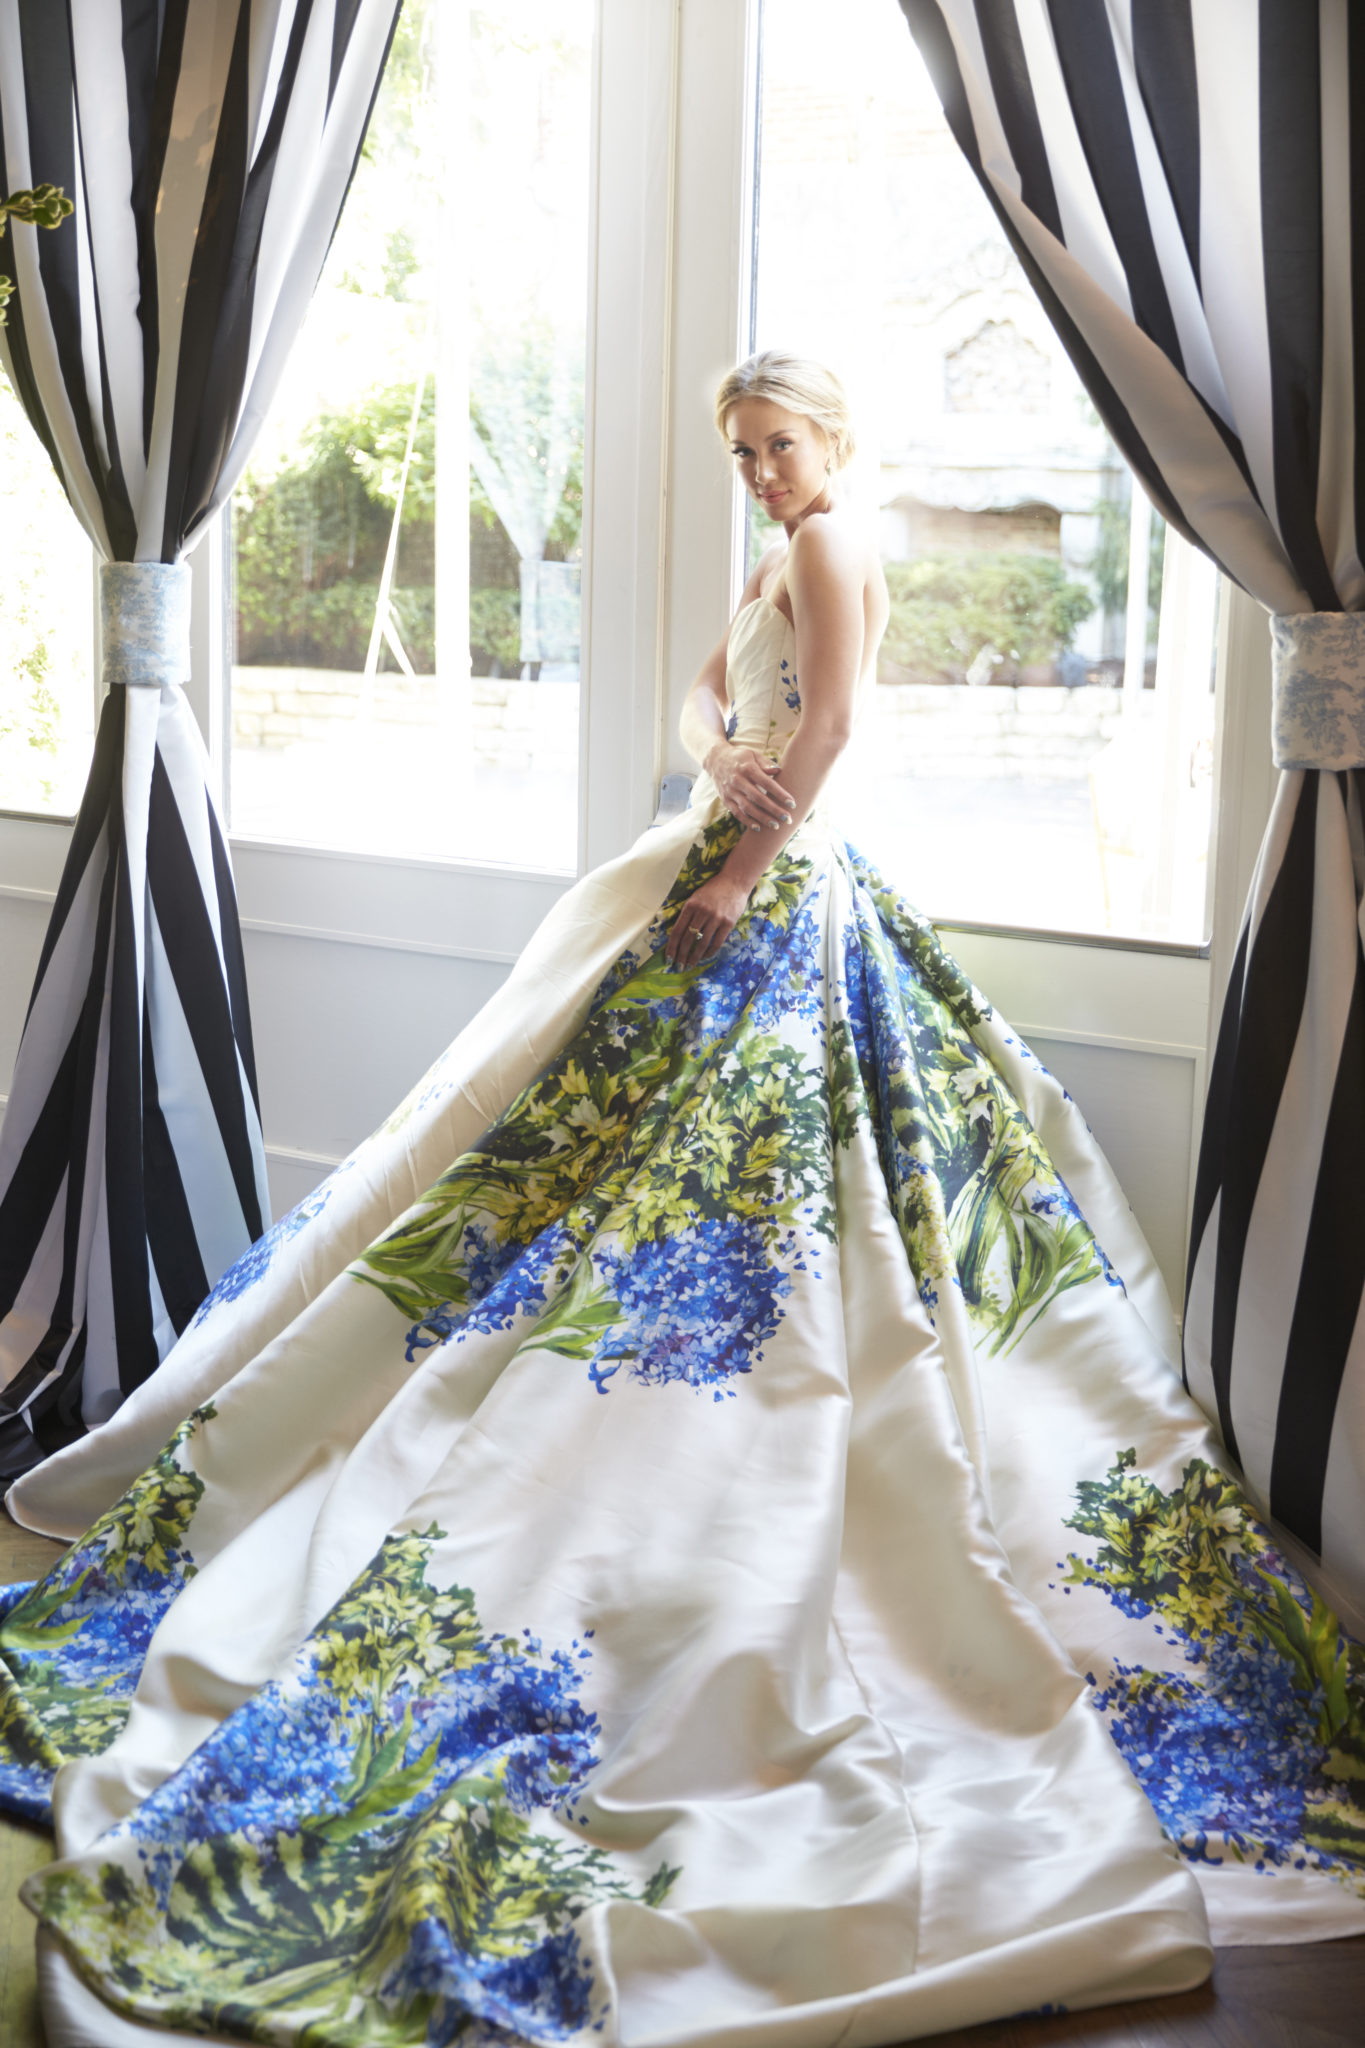 Stunning Romona Keveza Gown in Southern Charm Photoshoot